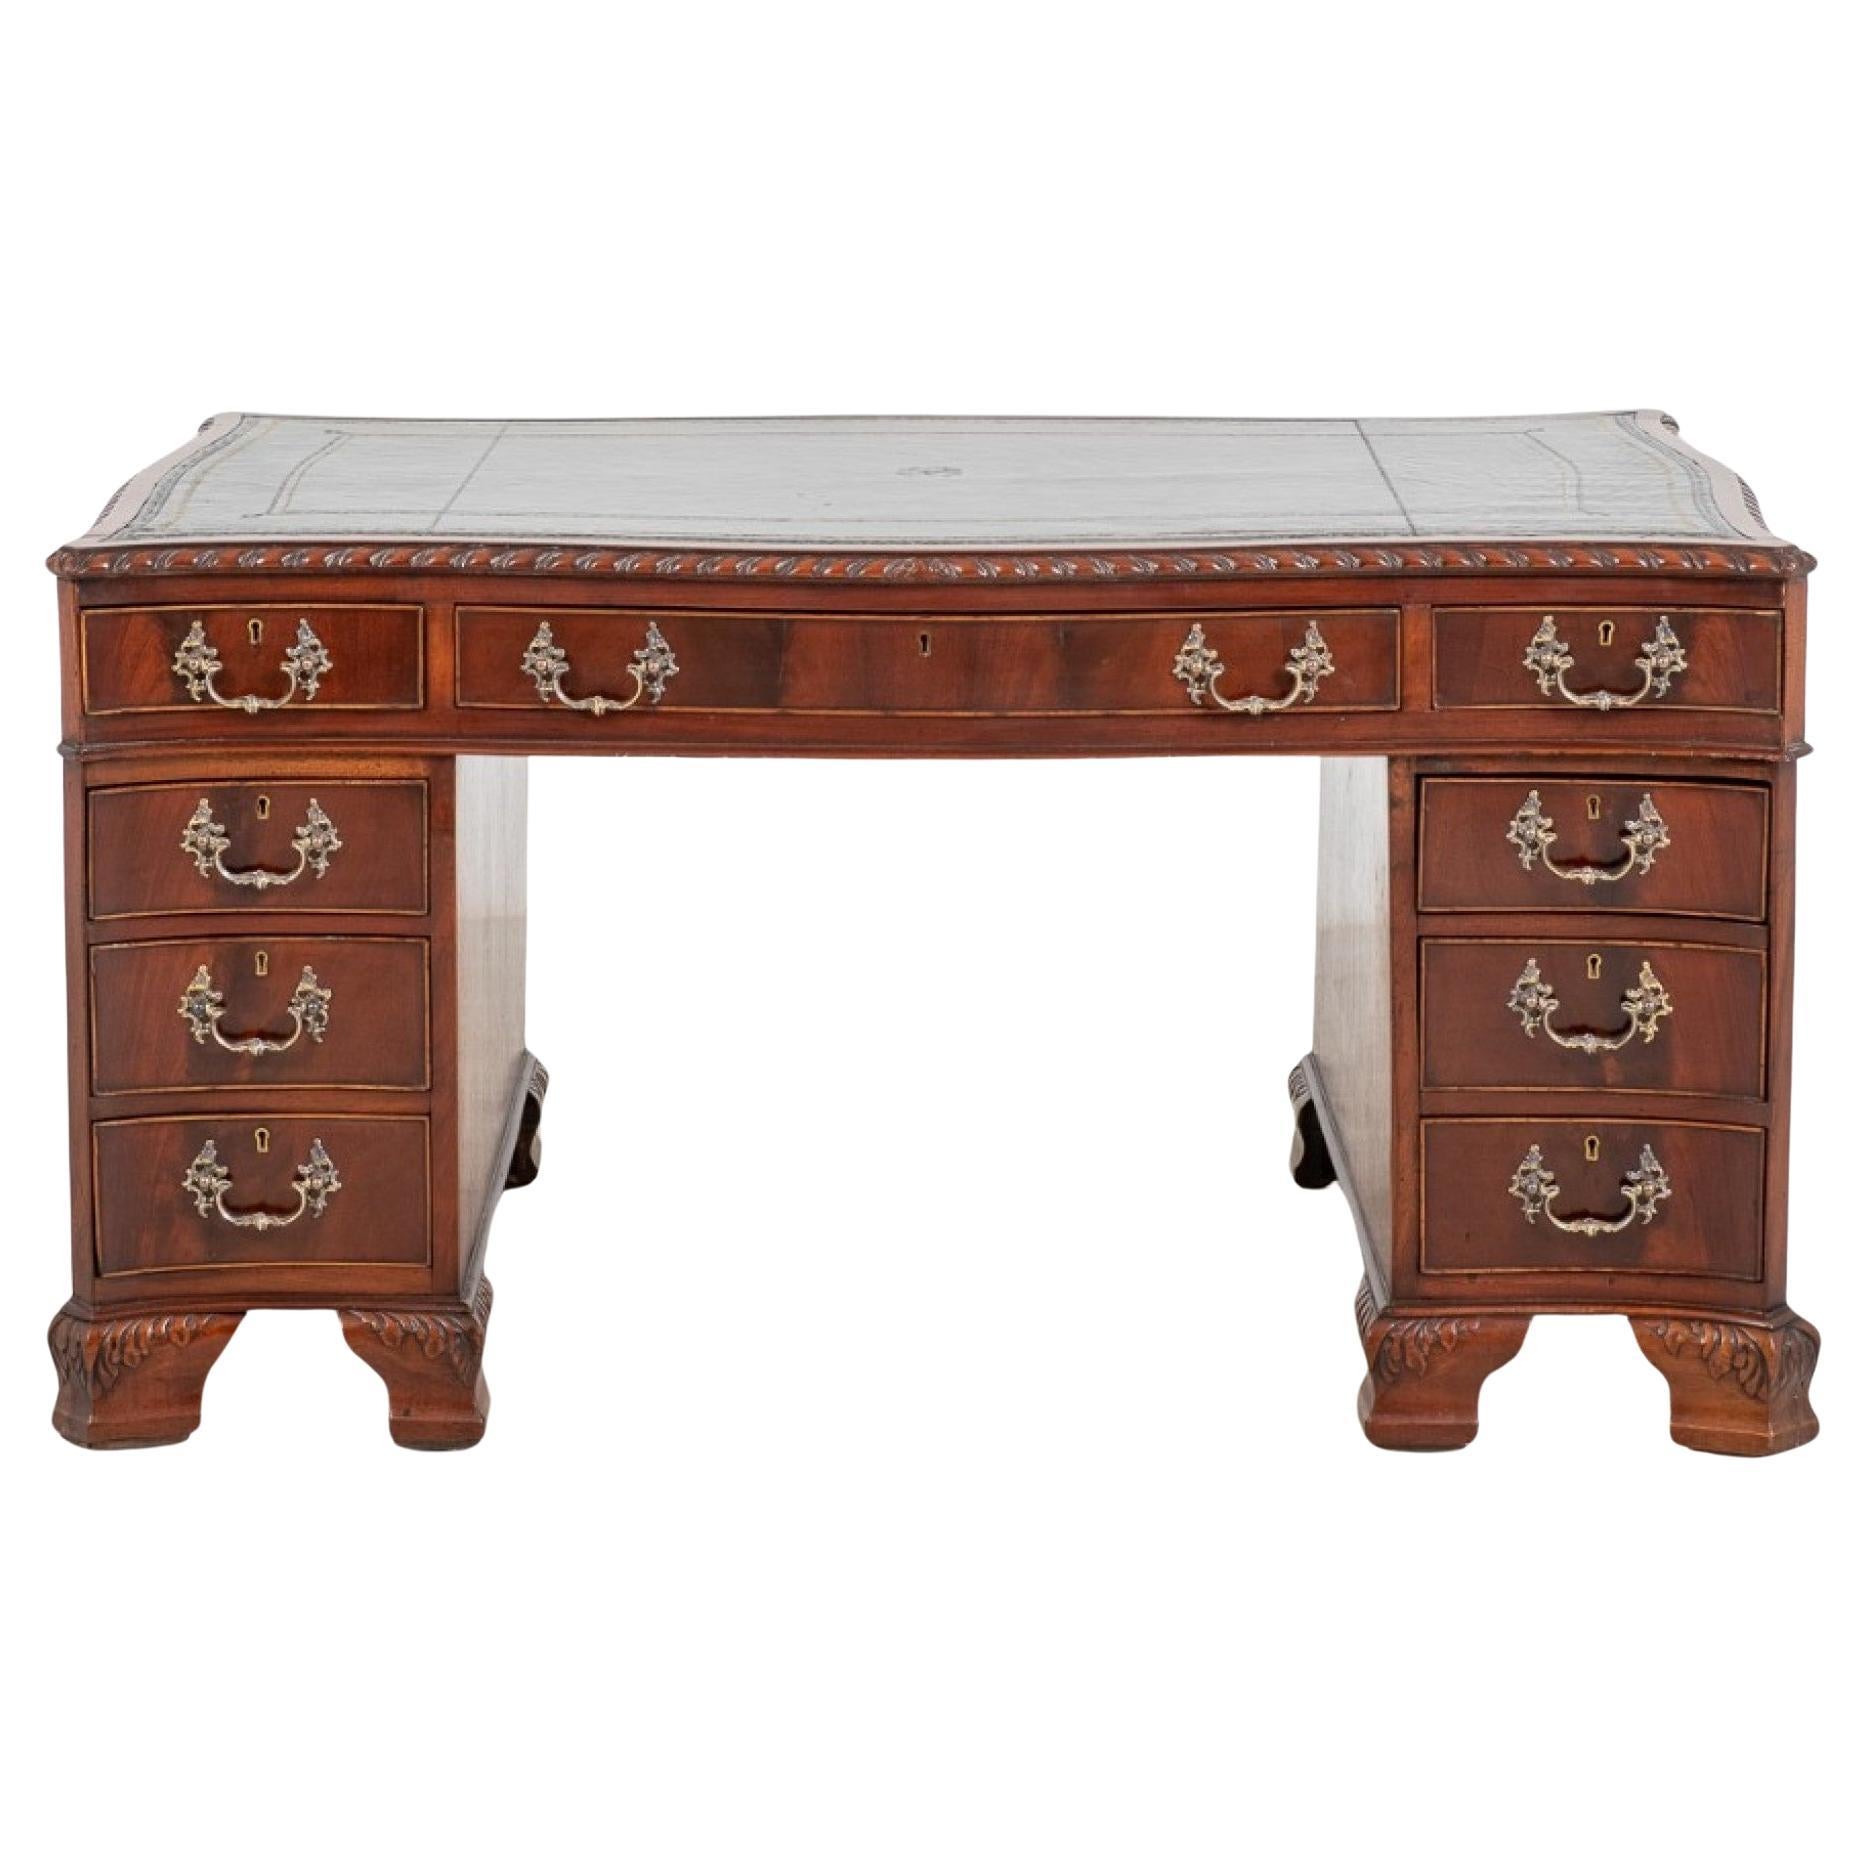 Mahogany Chippendale Style Desk of Serpentine Form.
Circa 1880
The Desk Stands Upon Typical Chippendale Style Carved Ogee Feet.
The Desk Has an arrangement of 9 Graduated Drawers.
The Drawers Feature High Quality Mahogany Flame Veneers and Cast